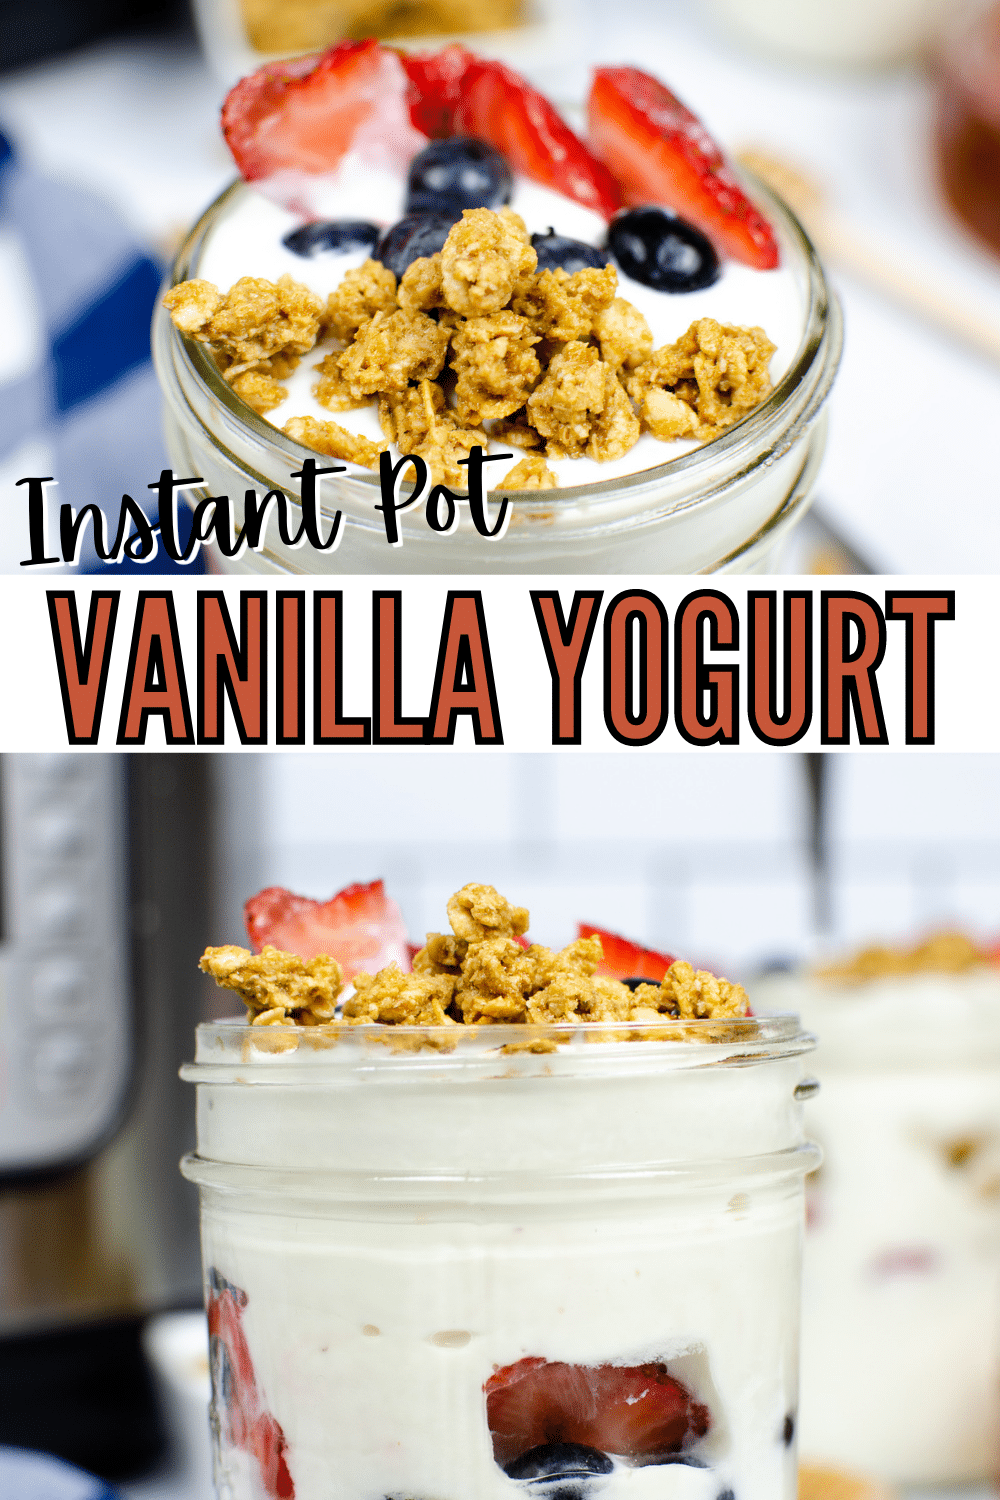 a collage of an overhead view and a side view of Instant Pot Vanilla Yogurt in a jar topped with strawberry, blueberry and granola next to a blue and white checkered cloth with an instant pot blurred in the background with title text reading Instant Pot Vanilla Yogurt